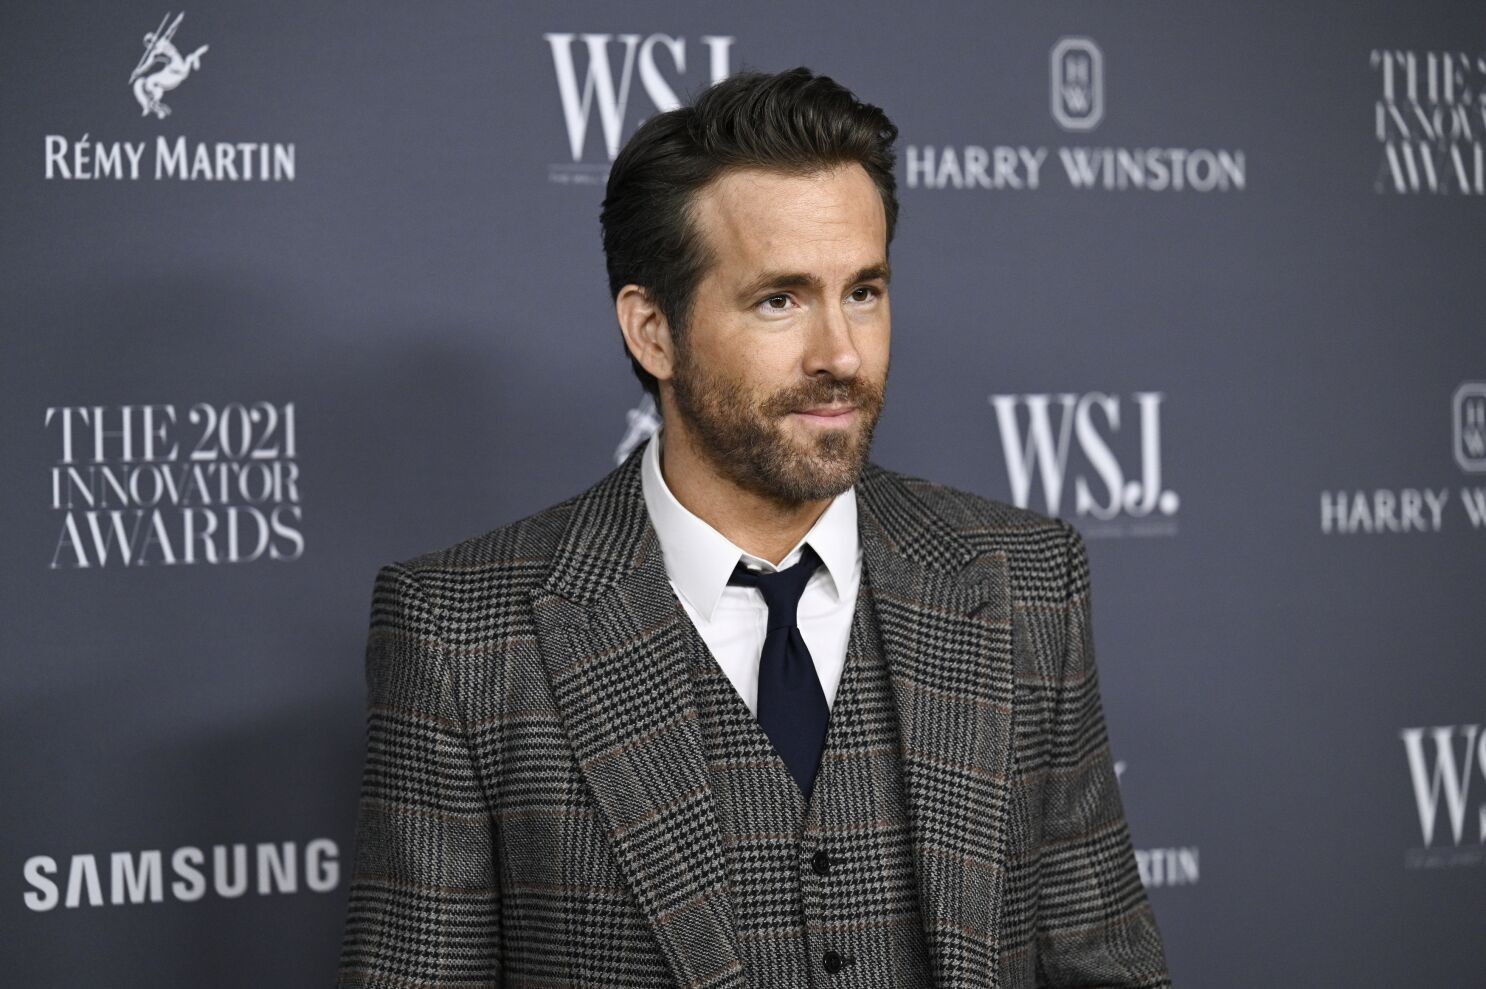 Ryan Reynolds is the co-owner of Wrexham AFC.